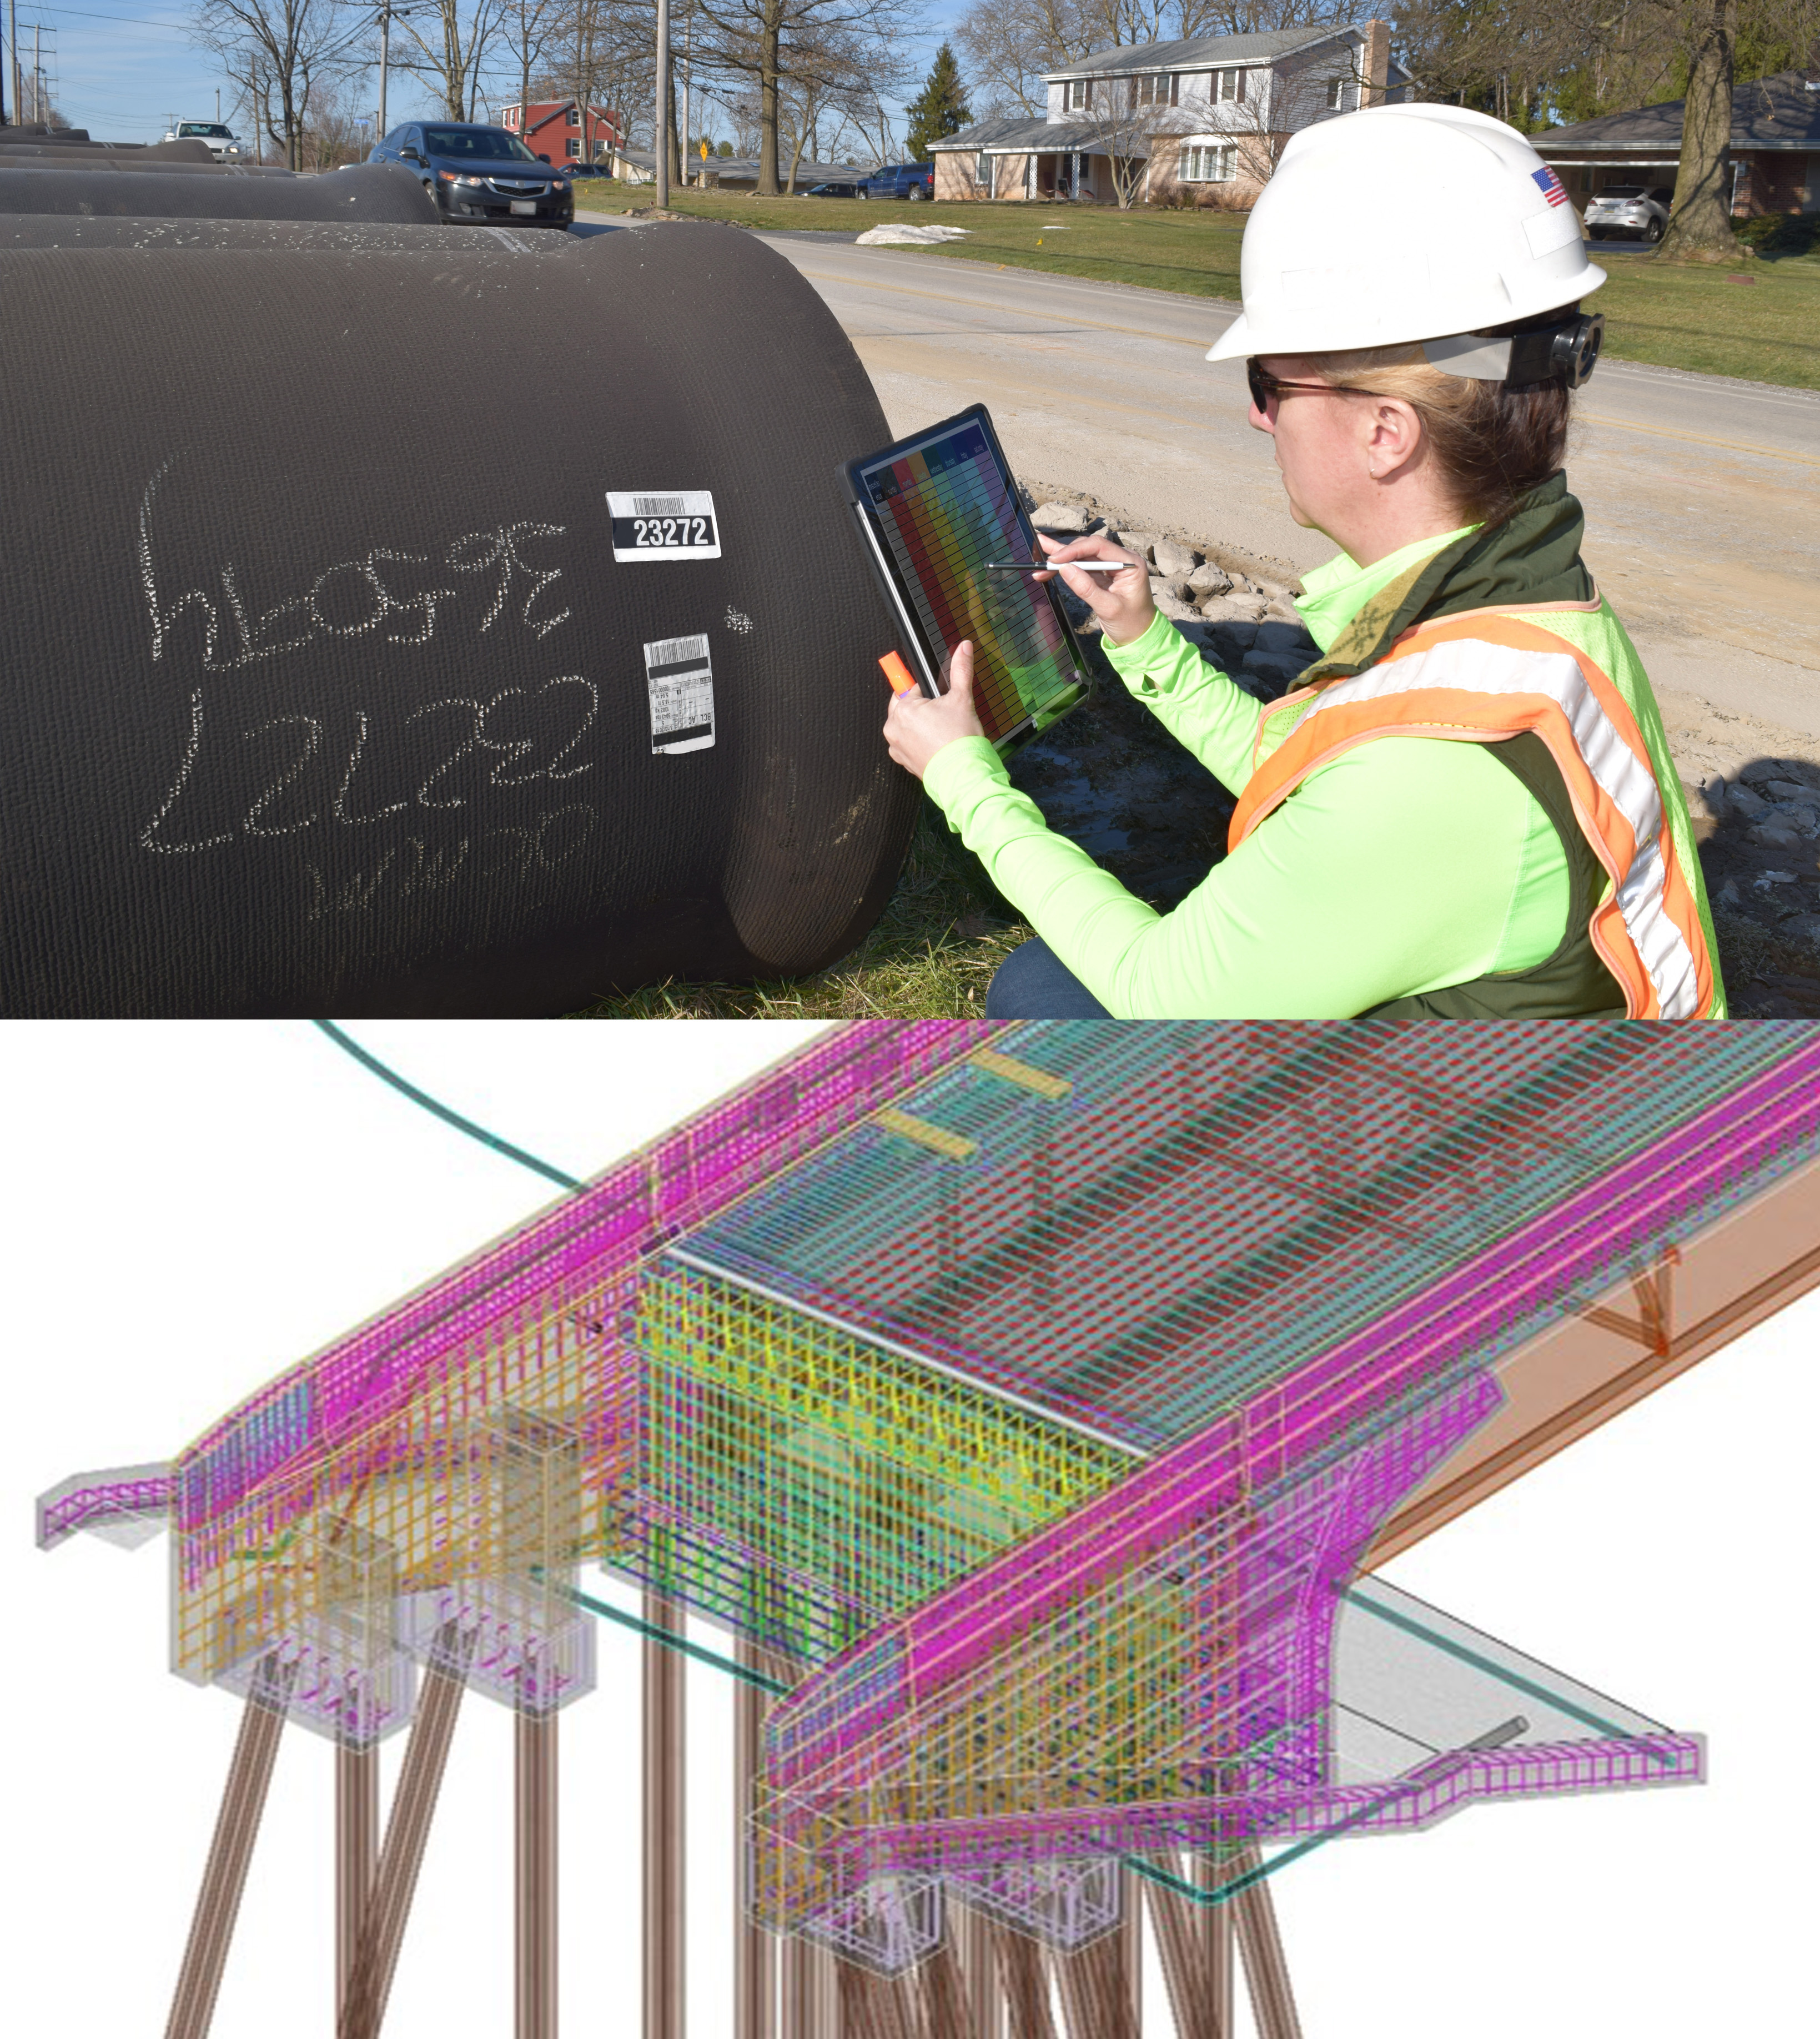 Two images stacked top to bottom. The top image is a woman in a safety vest and hard hat crouching next to a culvert pipe while working on a tablet. The bottom image is a colorful digital as-built of a bridge.